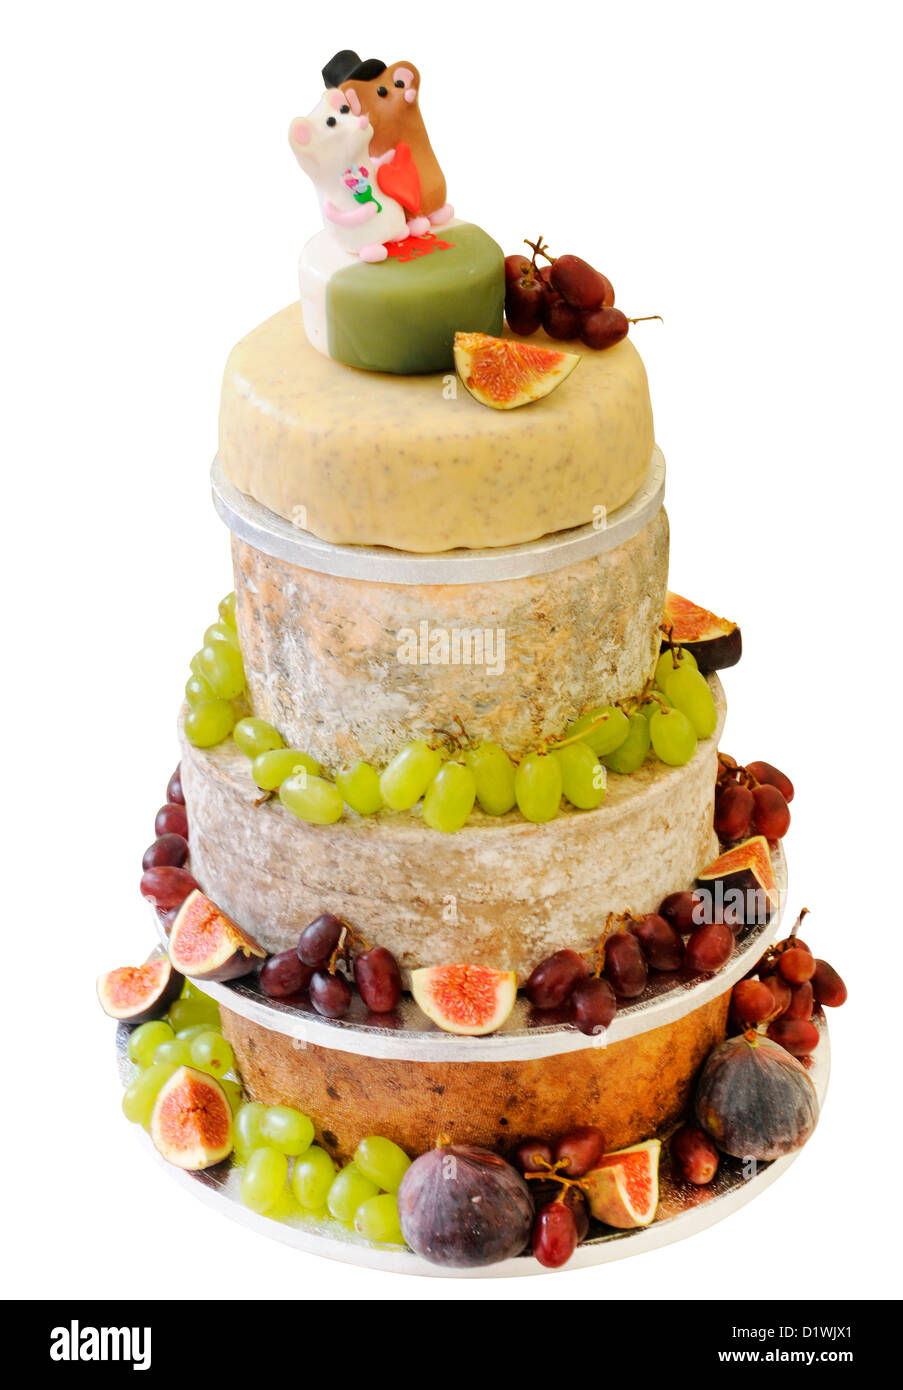 CUT OUT OF CHEESE CELEBRATION WEDDING CAKE Stock Photo